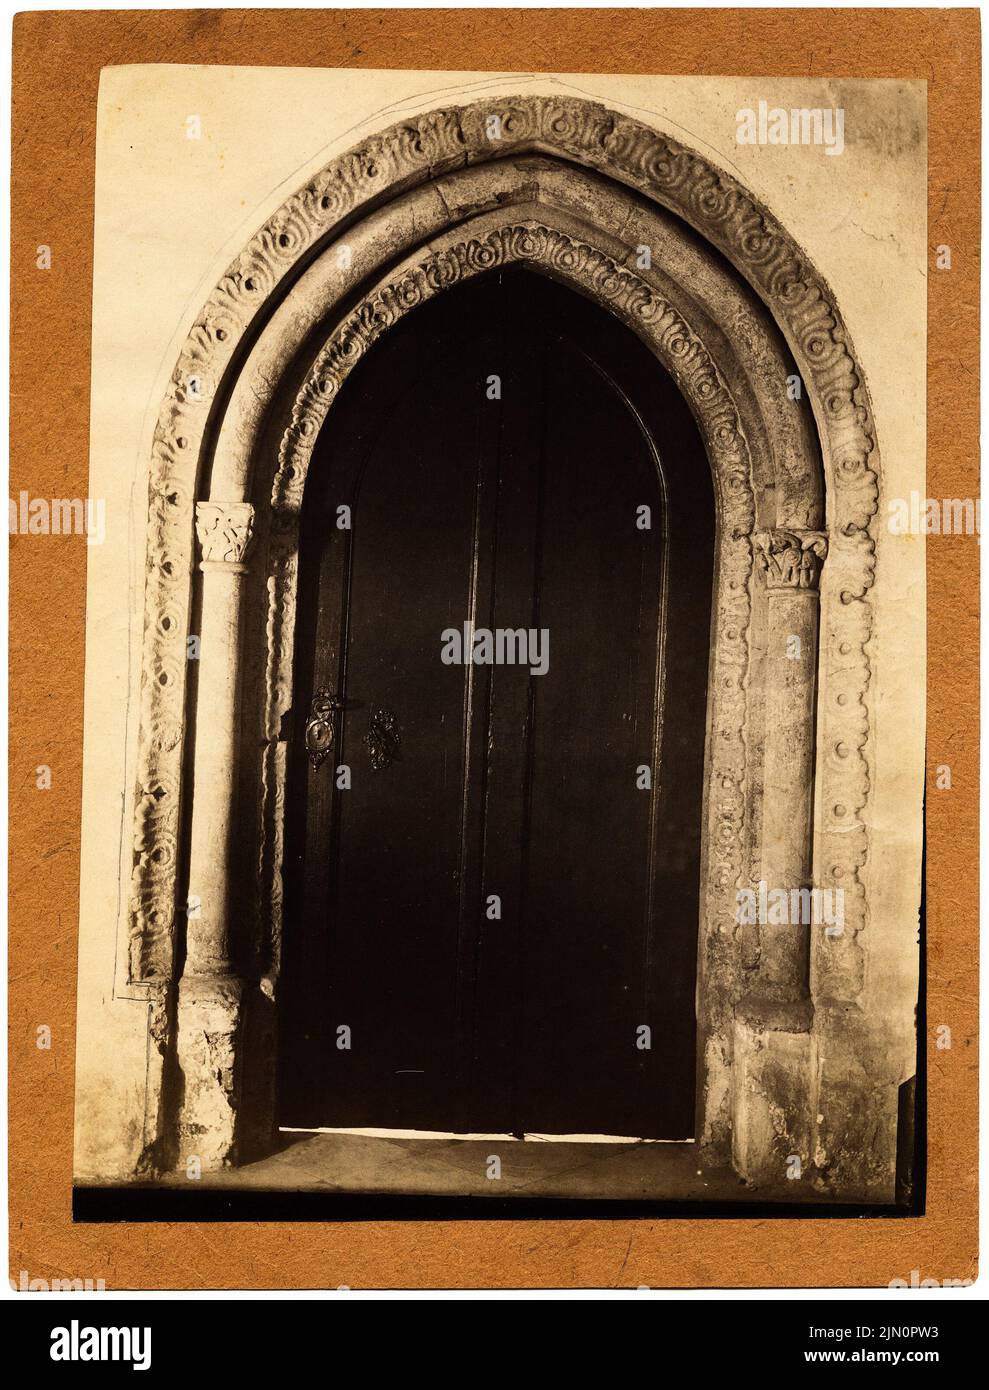 Unknown photographer, portal, bari (?) (Without dat.): pointed arch portal (Apulian-Staufish?). Photo on cardboard, 26.7 x 20.3 cm (including scan edges) unbek. Fotograf : Portal, Bari (?) (ohne Dat.) Stock Photo